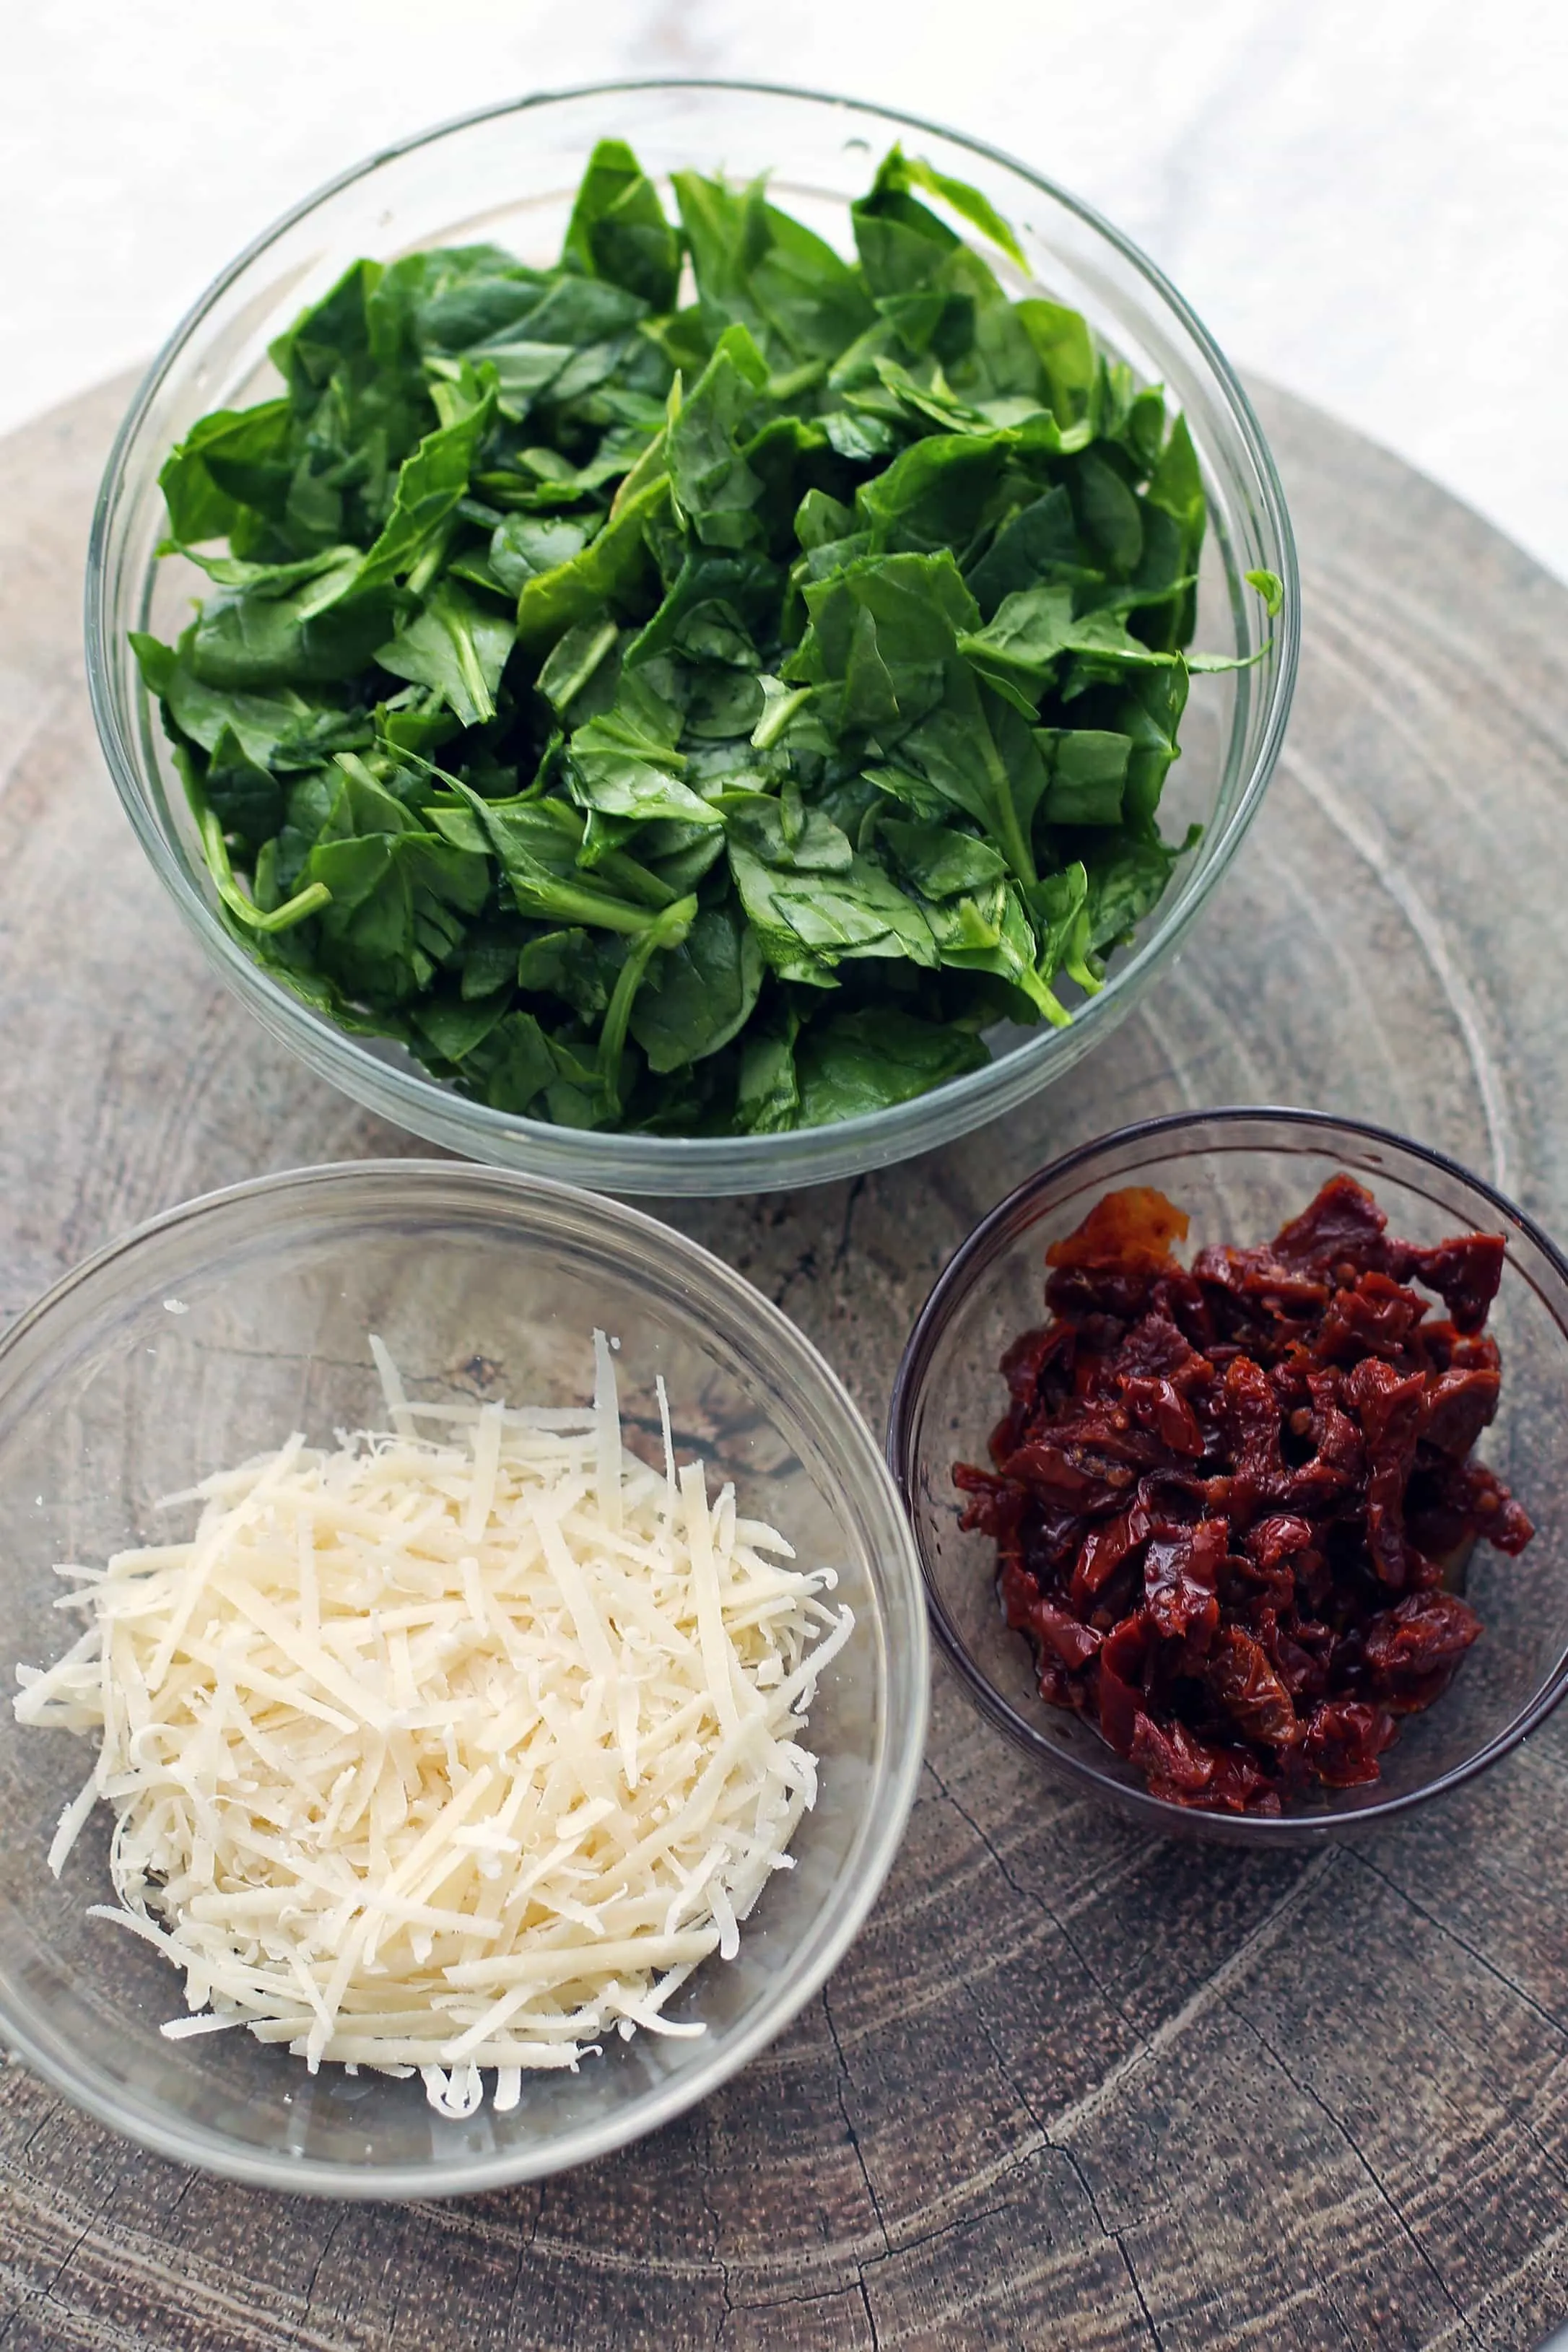 Three glass bowls containing freshly grated parmesan cheese, chopped sun-dried tomatoes, and chopped baby spinach.